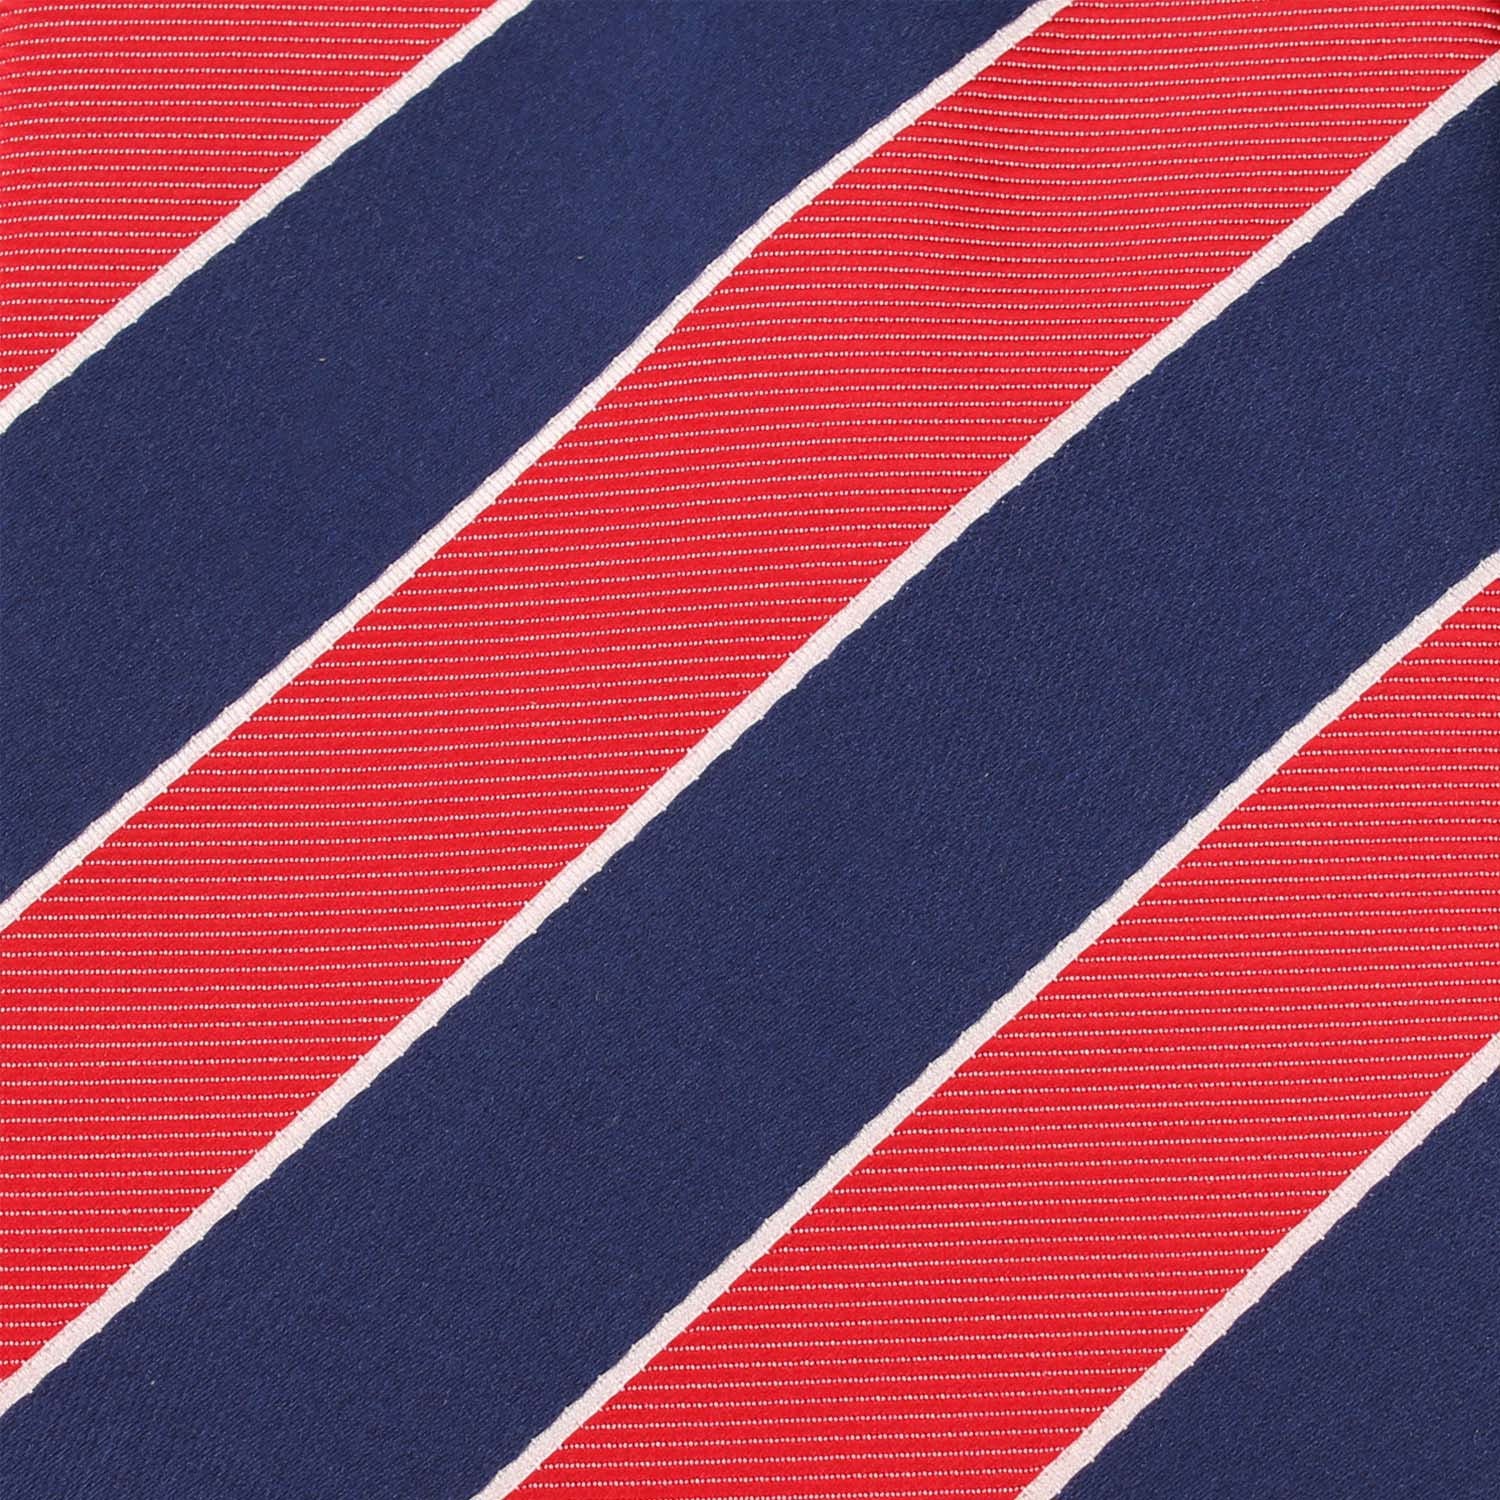 Navy Blue White and Red Diagonal Fabric Necktie X221